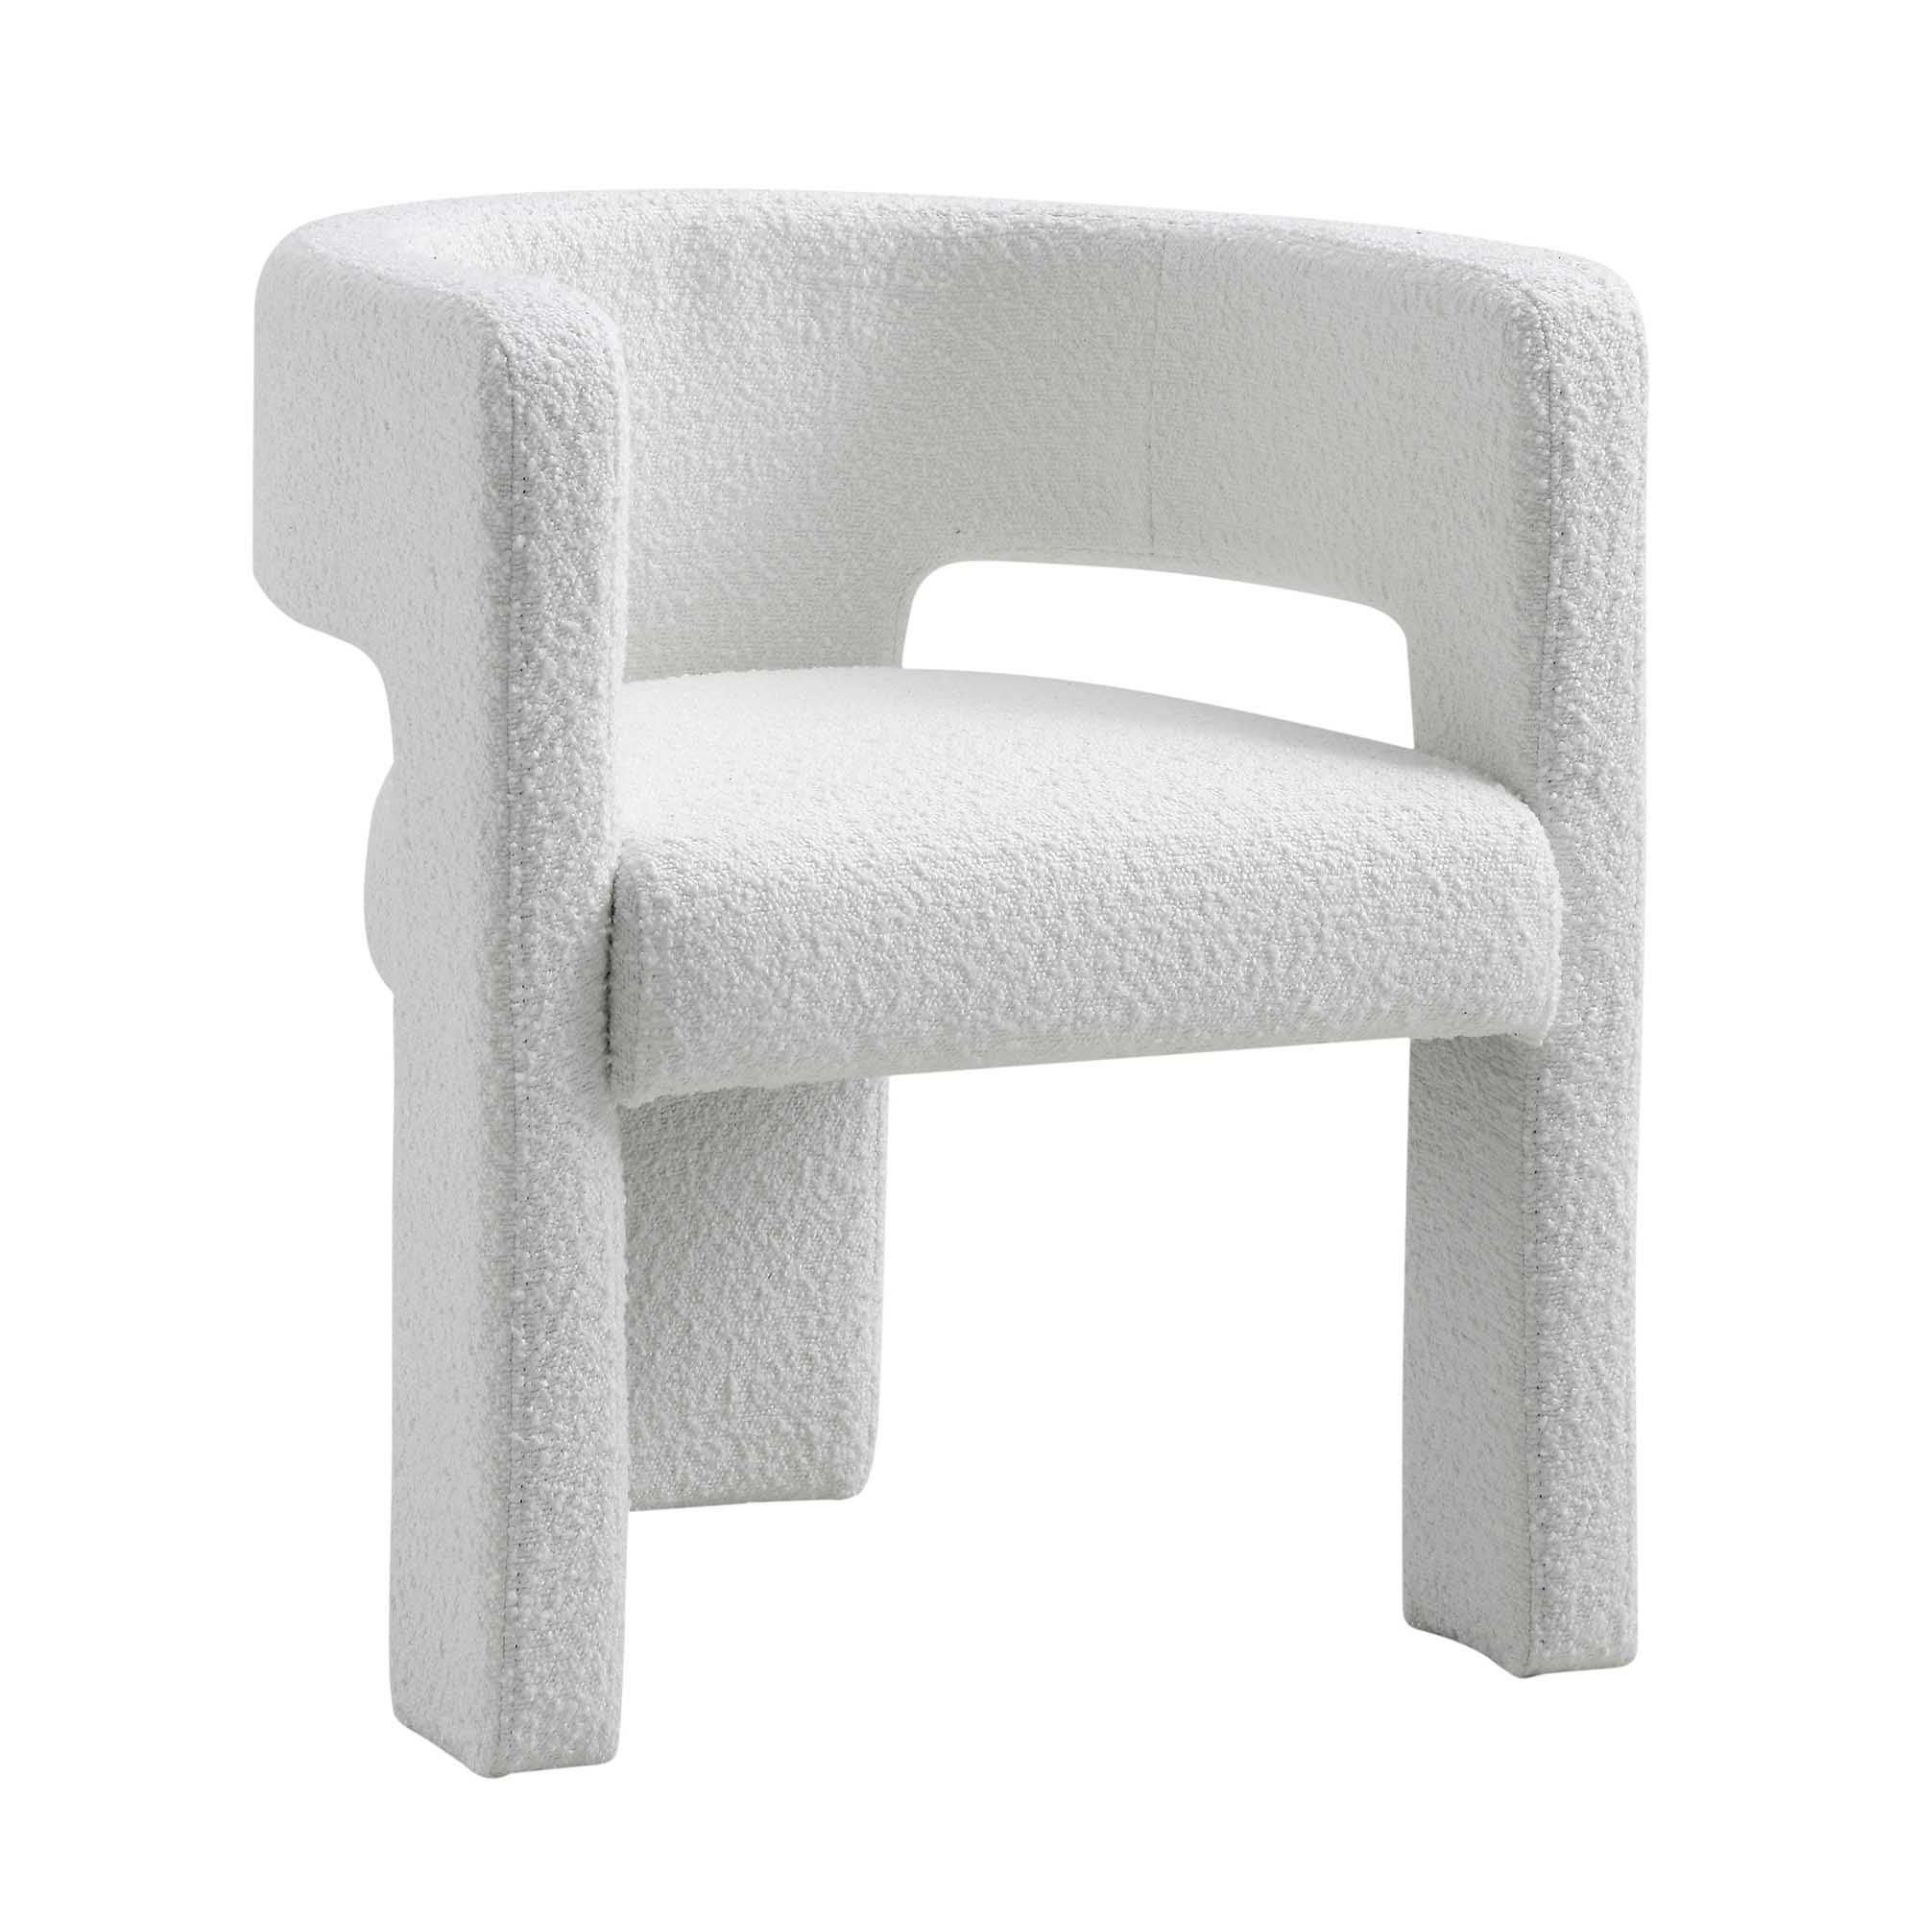 Greenwich White Boucle Dining Chair. - R14. RRP £249.99. Our beautiful Greenwich chair features - Bild 2 aus 2